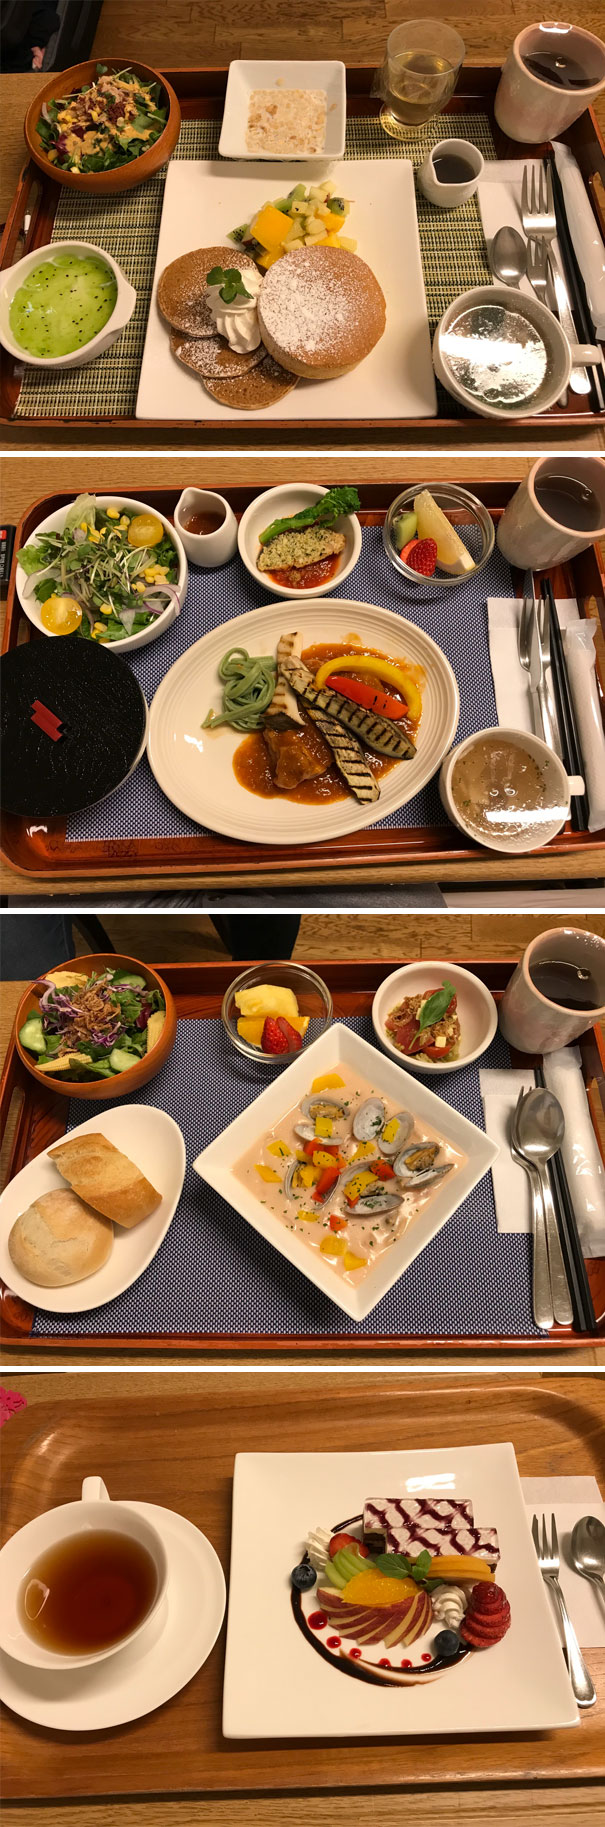 I Recently Gave Birth In Japan. Here Is Some Of The Hospital Food I Ate